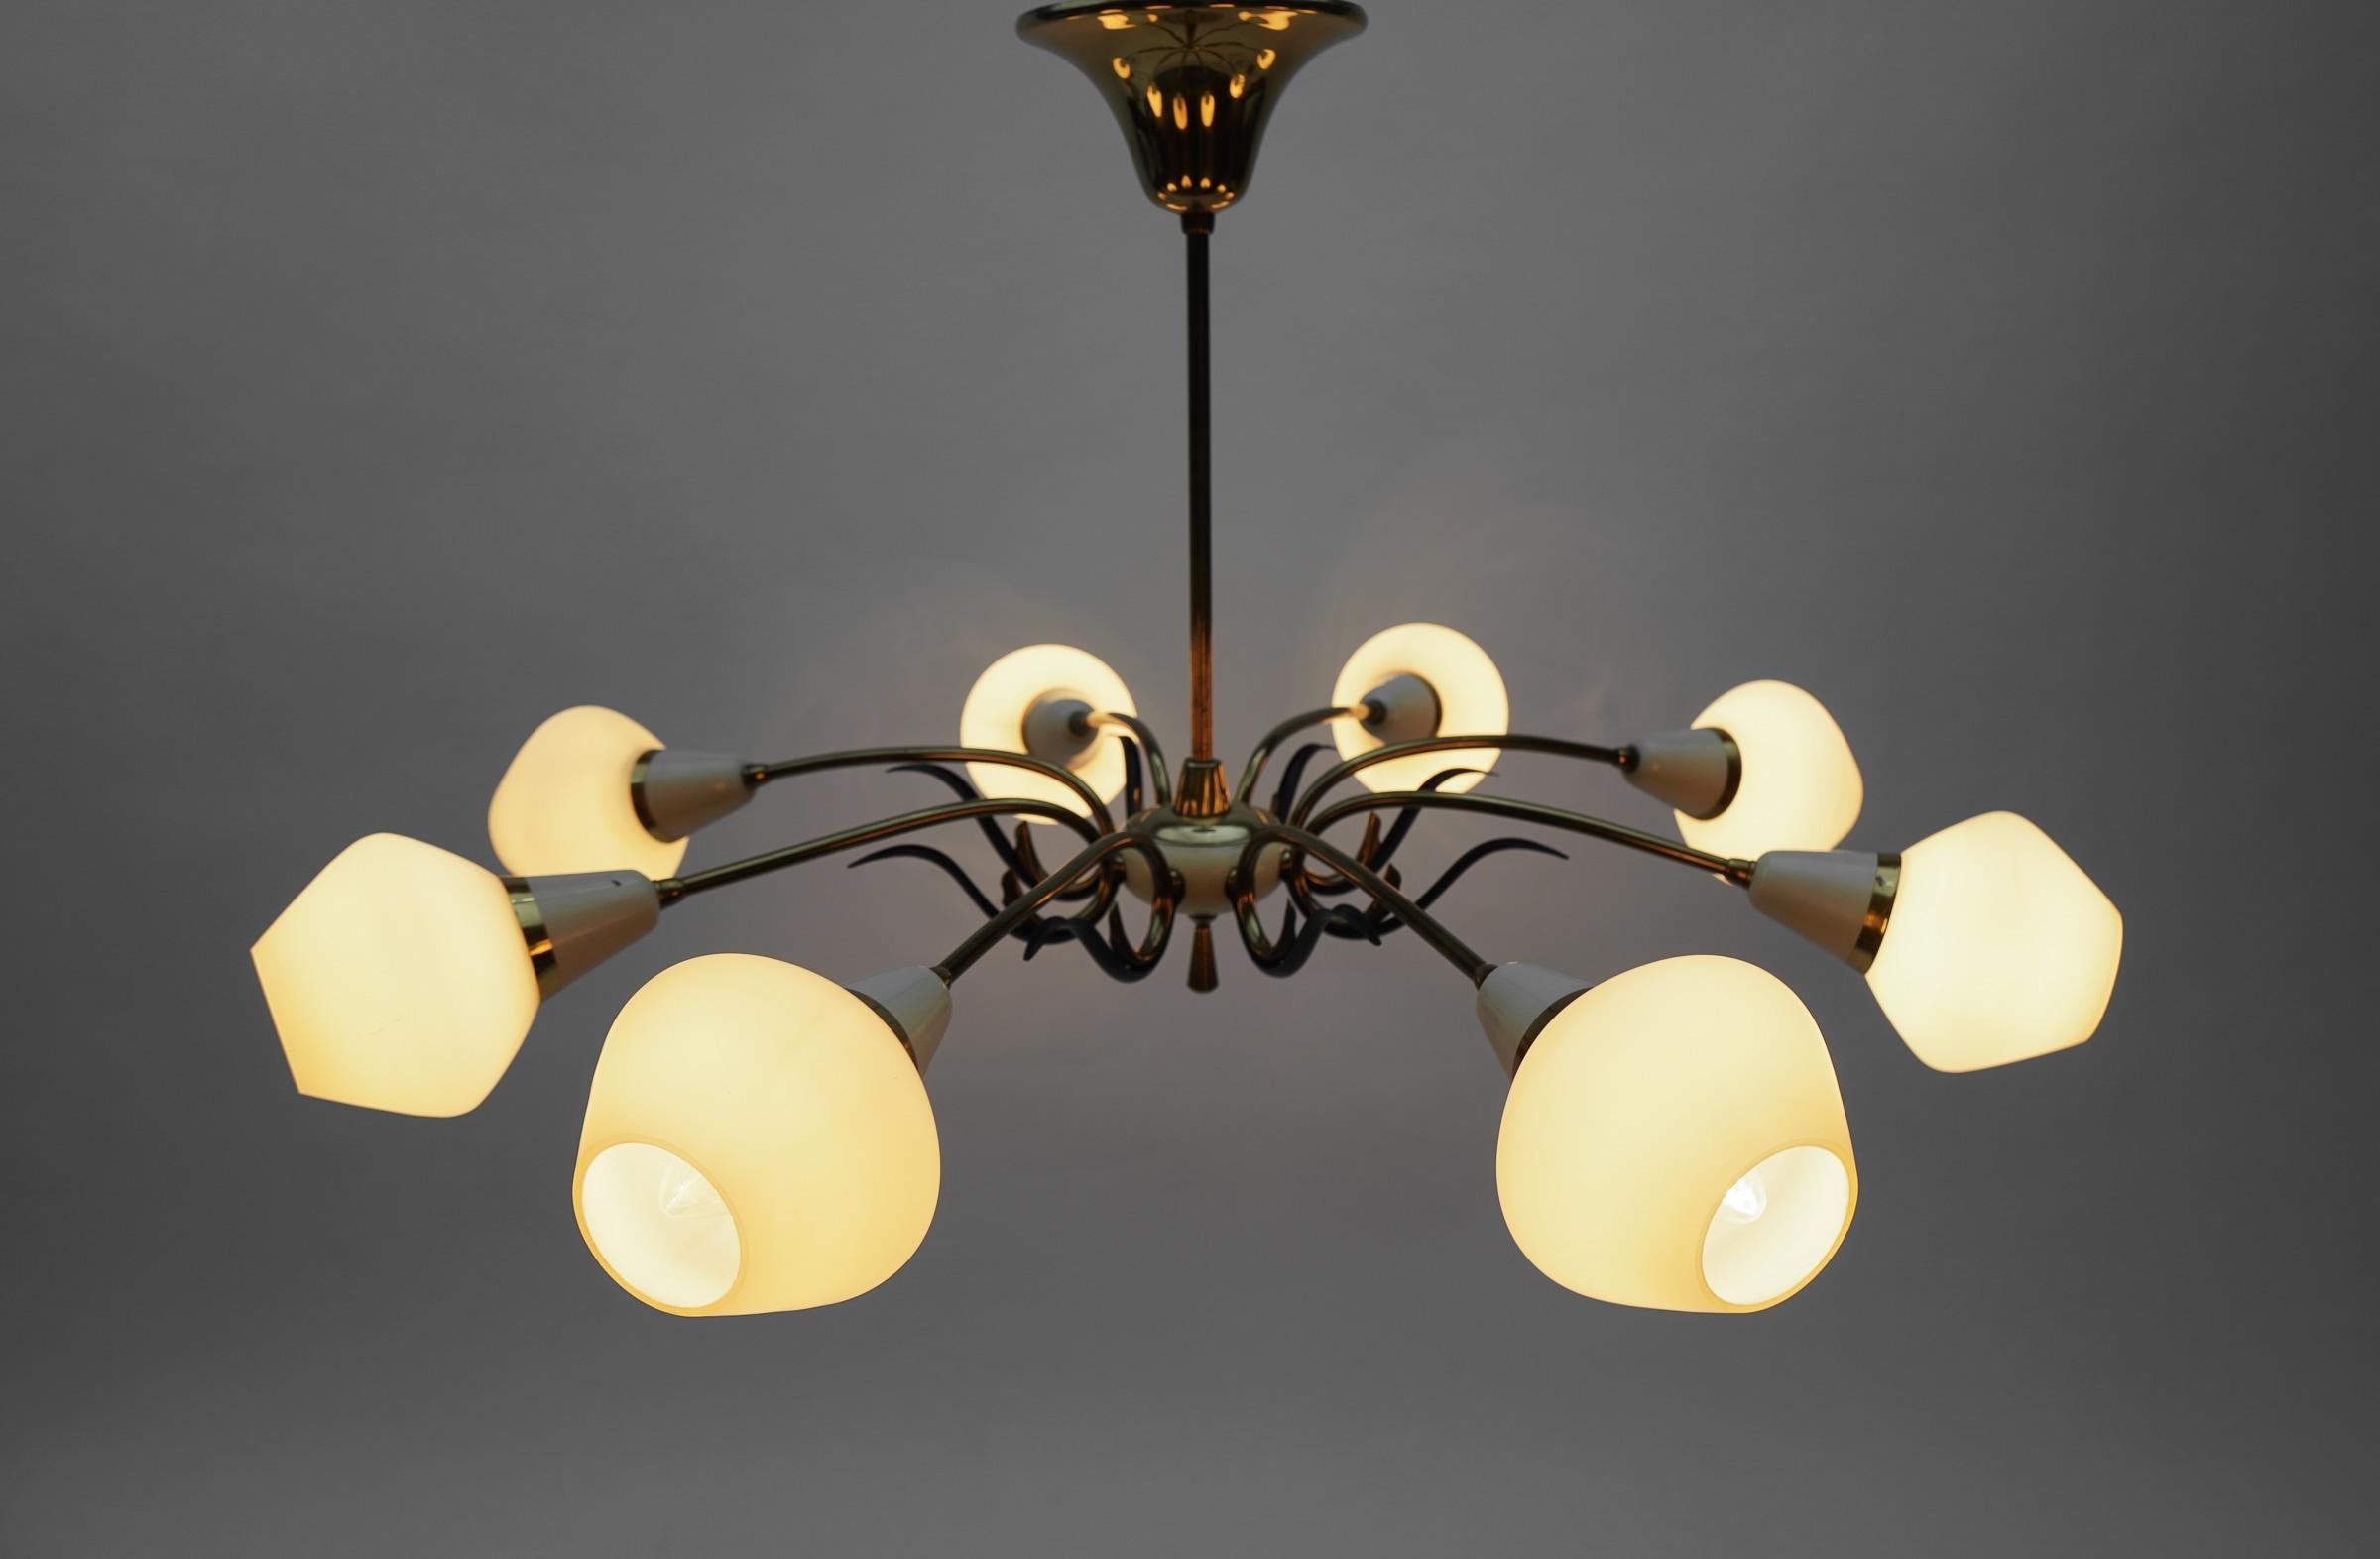 Mid-20th Century Ceiling 8-Light Sputnik Lamp in the Style of Arteluce, Italy 1950s For Sale